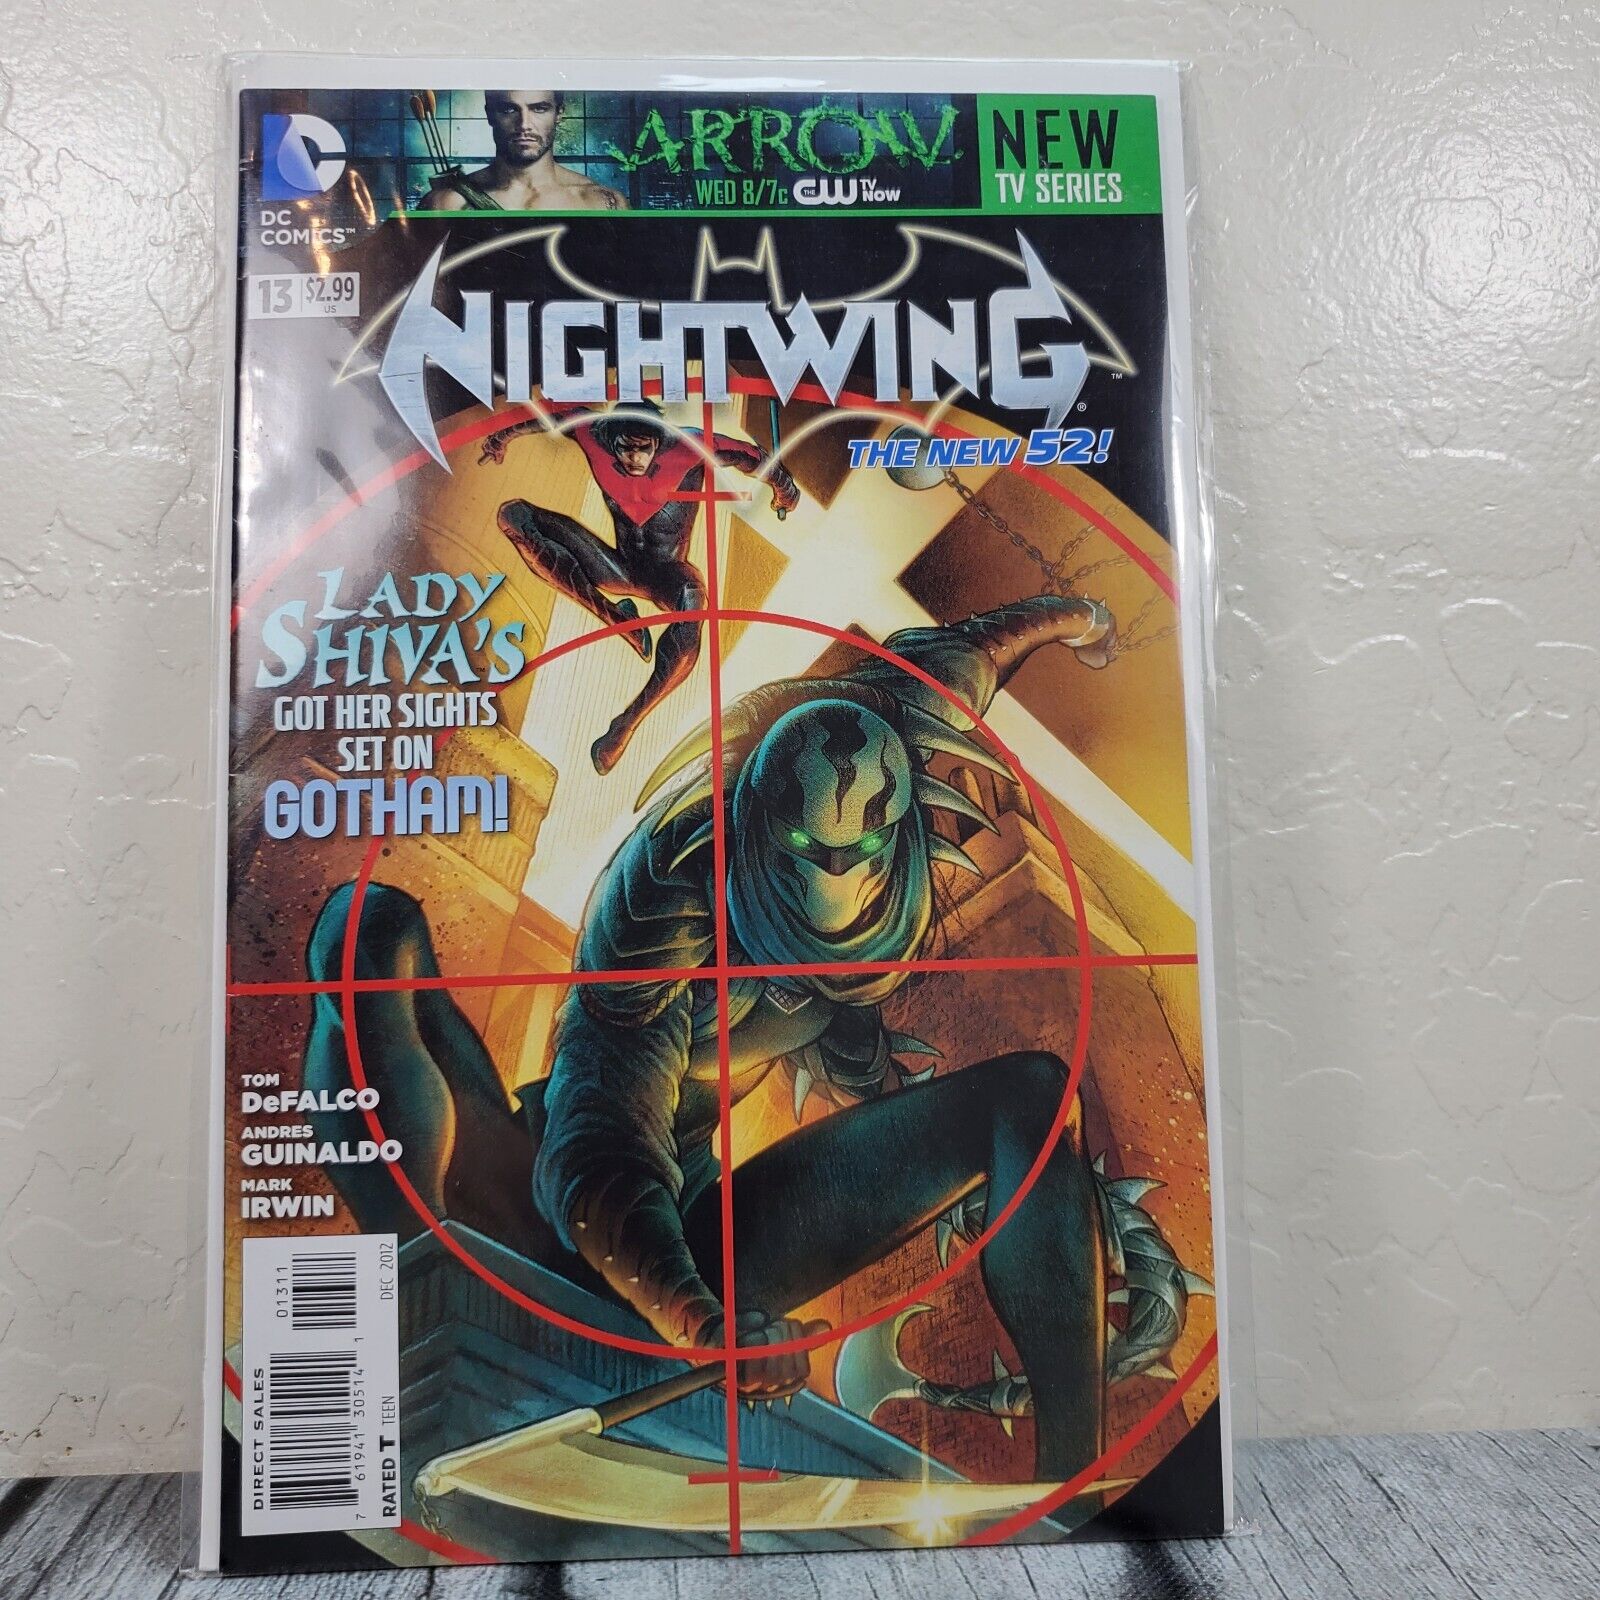 DC Comics The New 52 Nightwing #13 2012 Modern Comic Book Sleeved Boarded